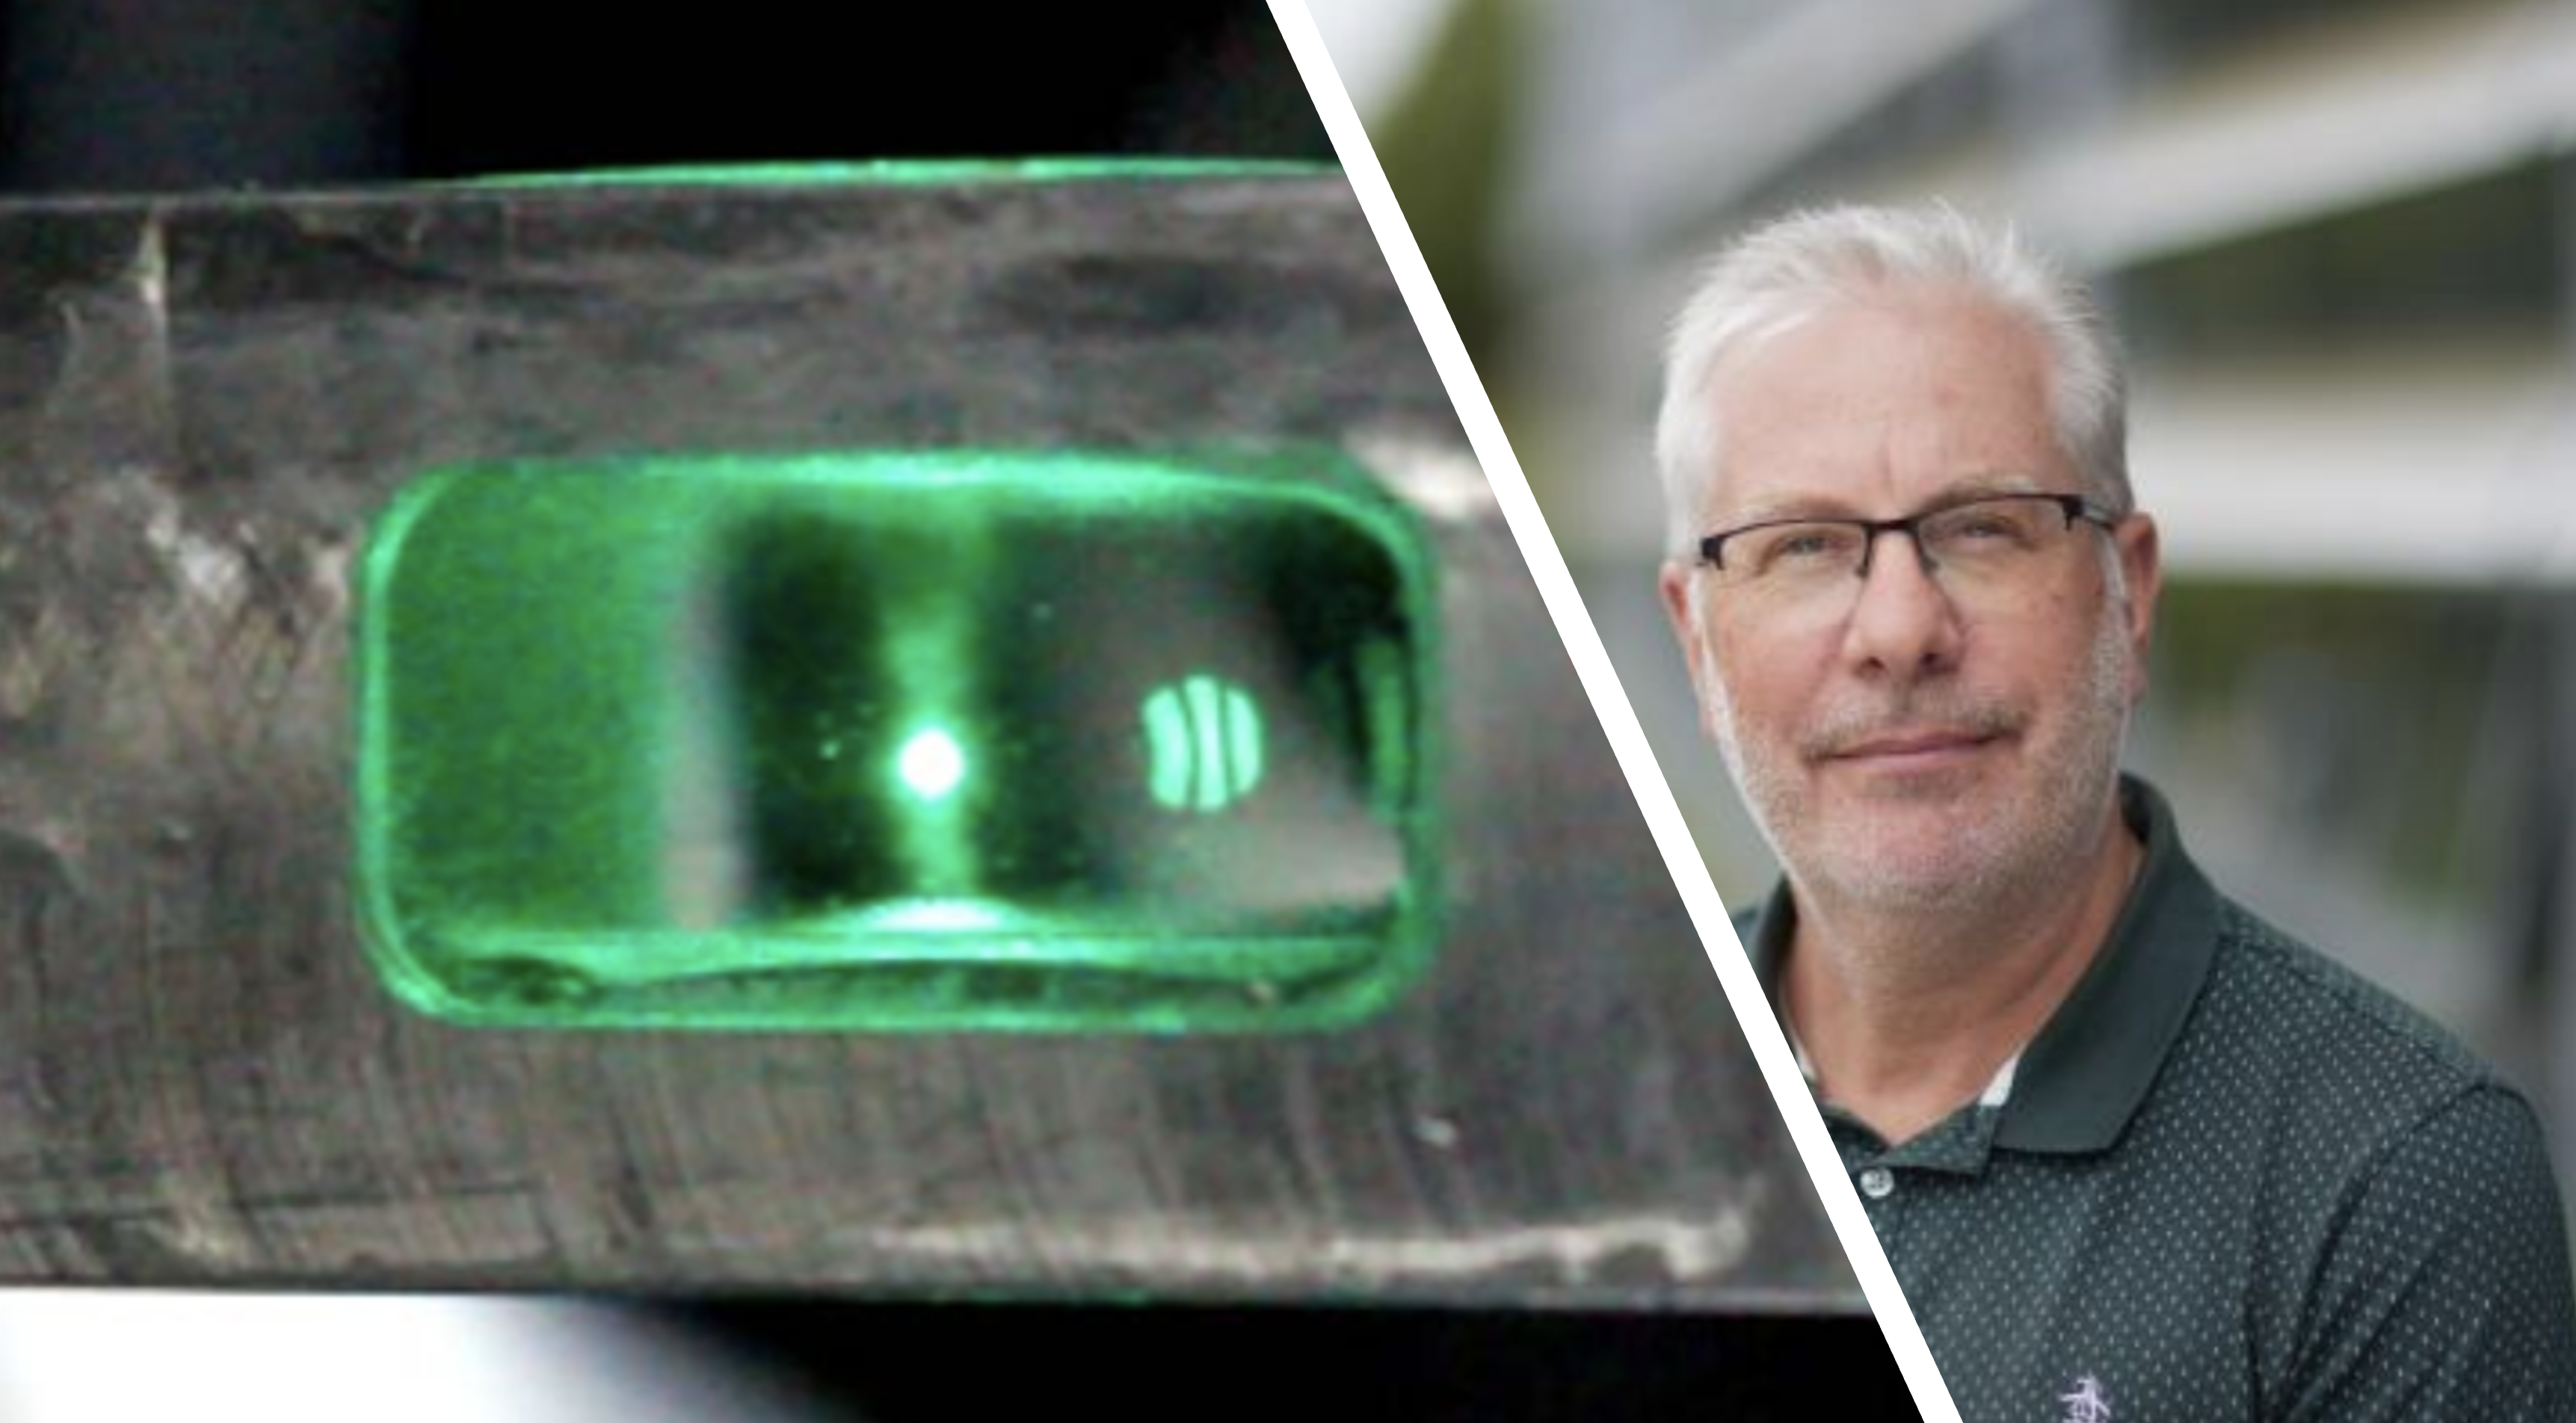 Dr Andy Ward and an Optically trapped particle